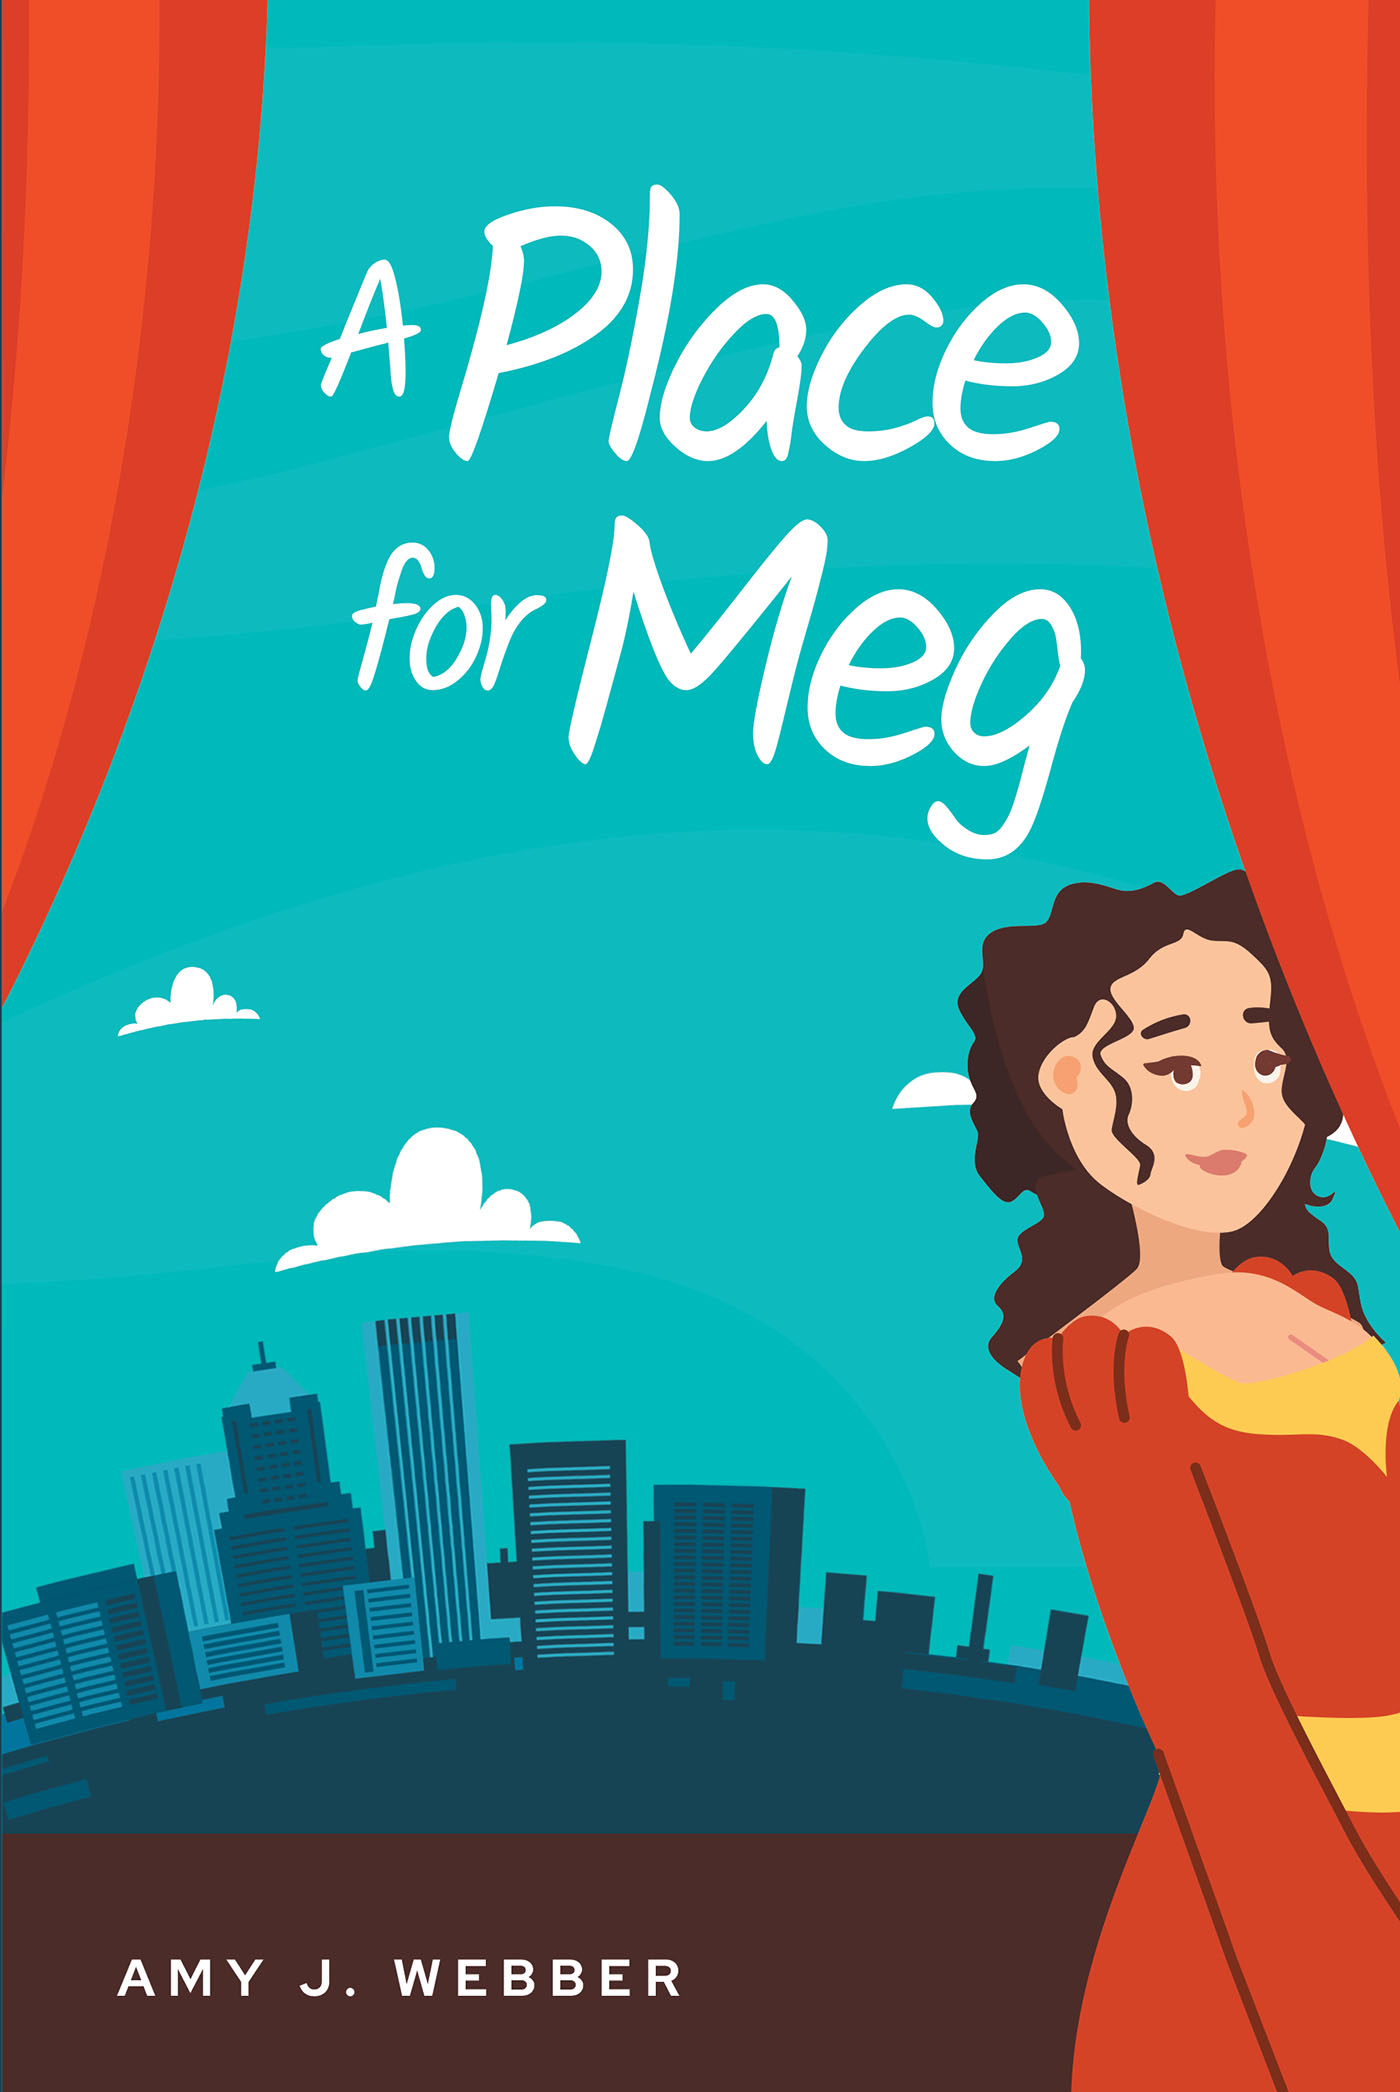 Author Amy J. Webber’s New Book, "A Place for Meg," Tells the Story of a Small-Town High School Transplant Who Moves to the Big City and Must Navigate Her New Life